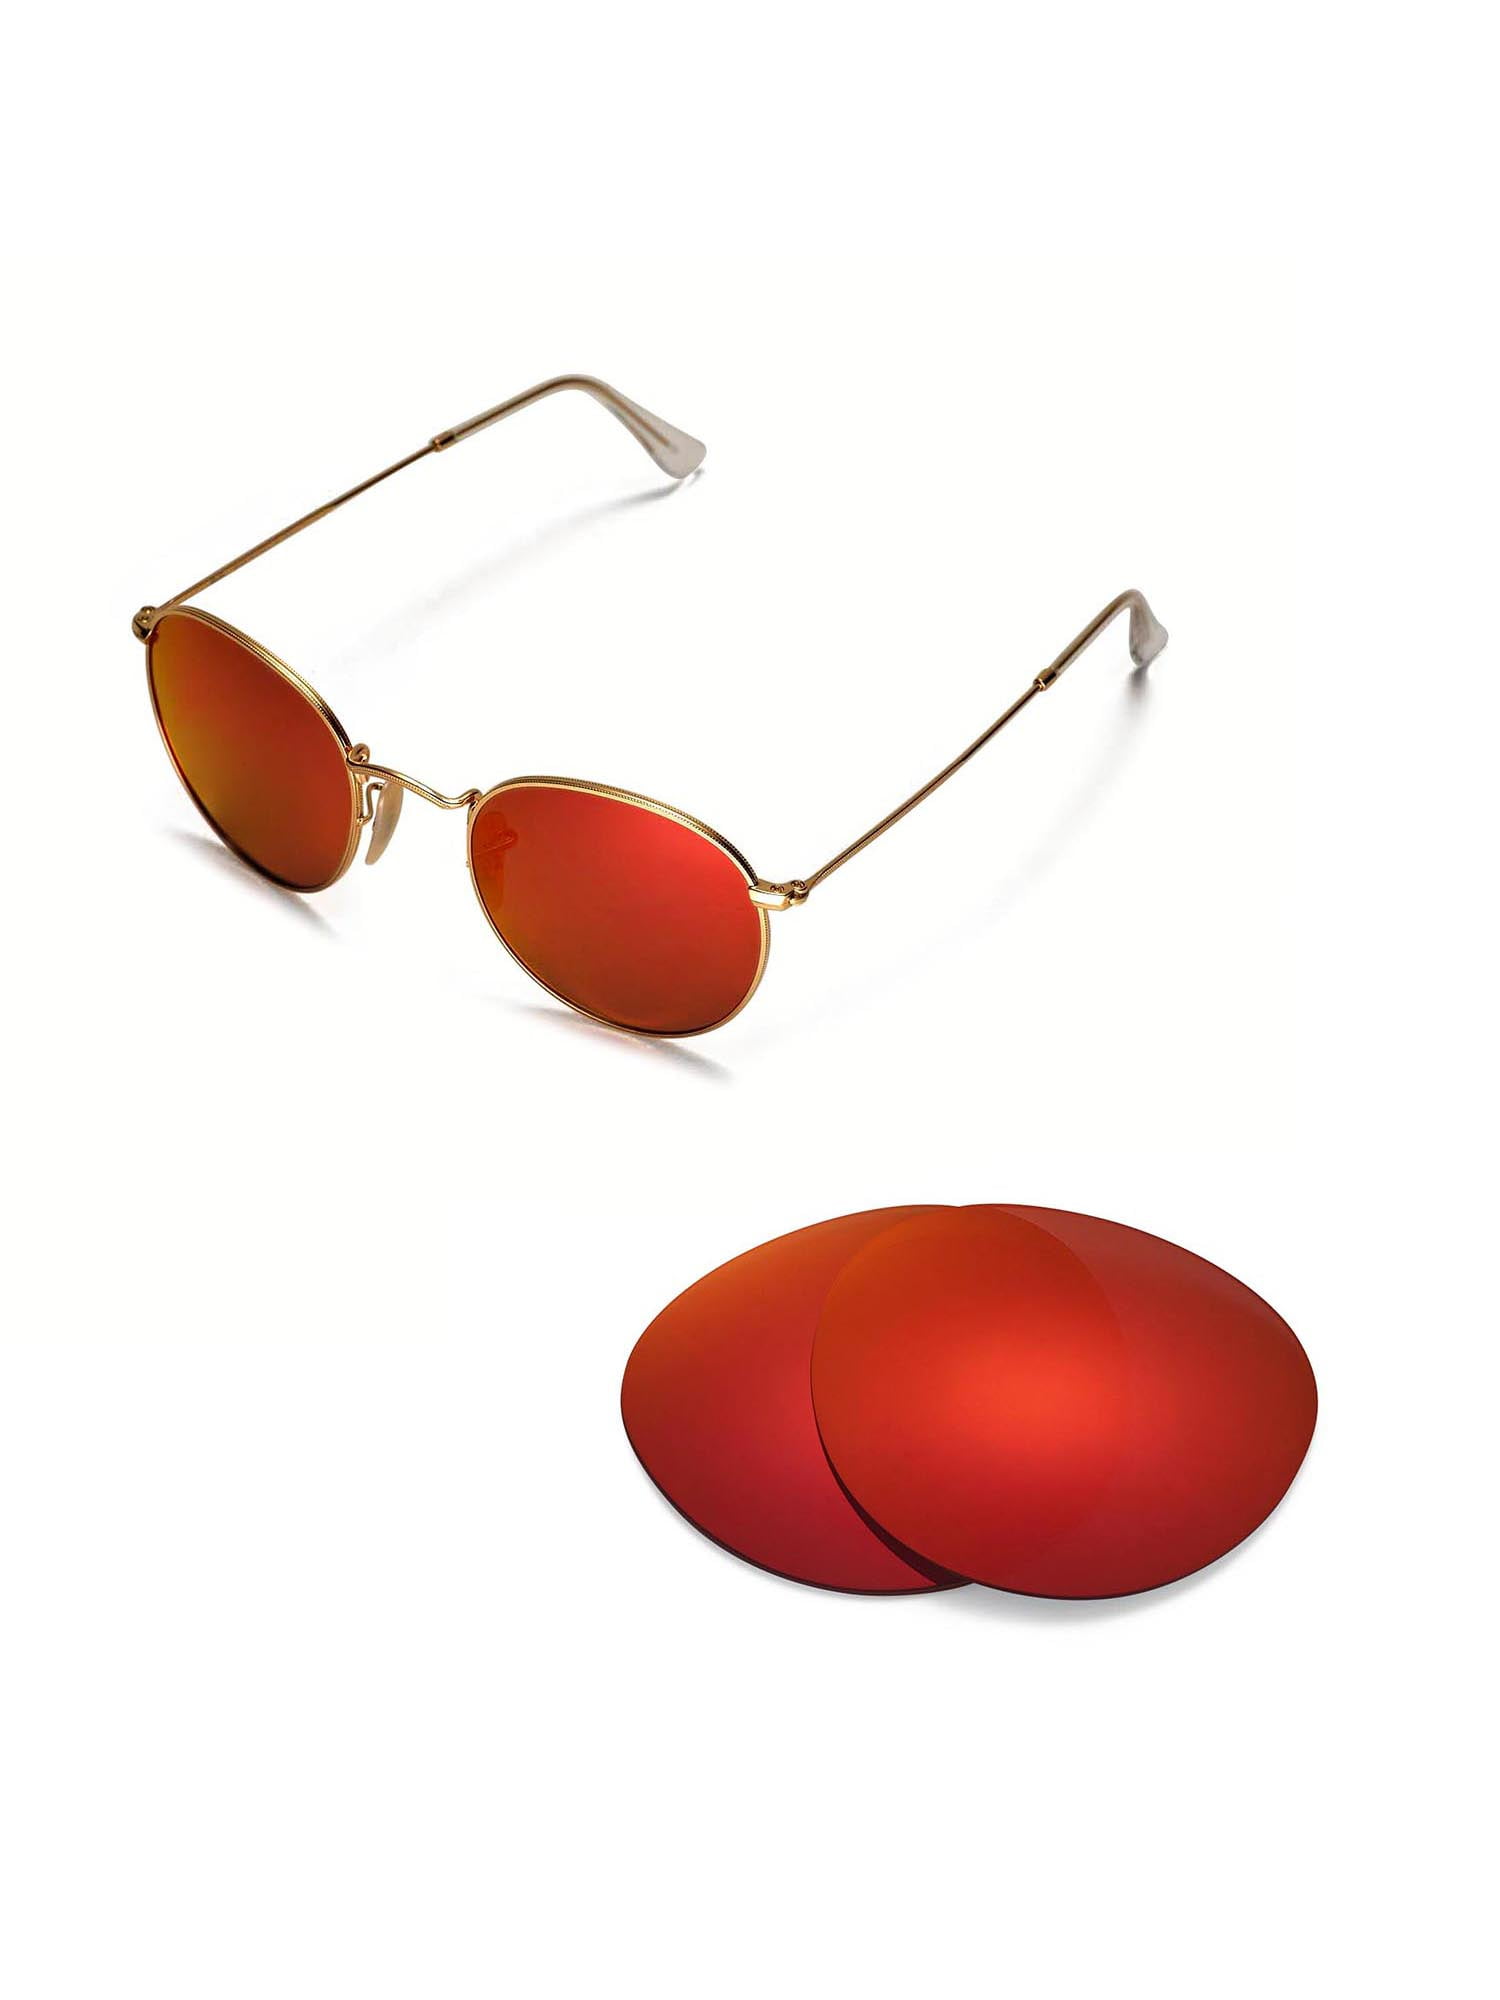 ray ban round metal red